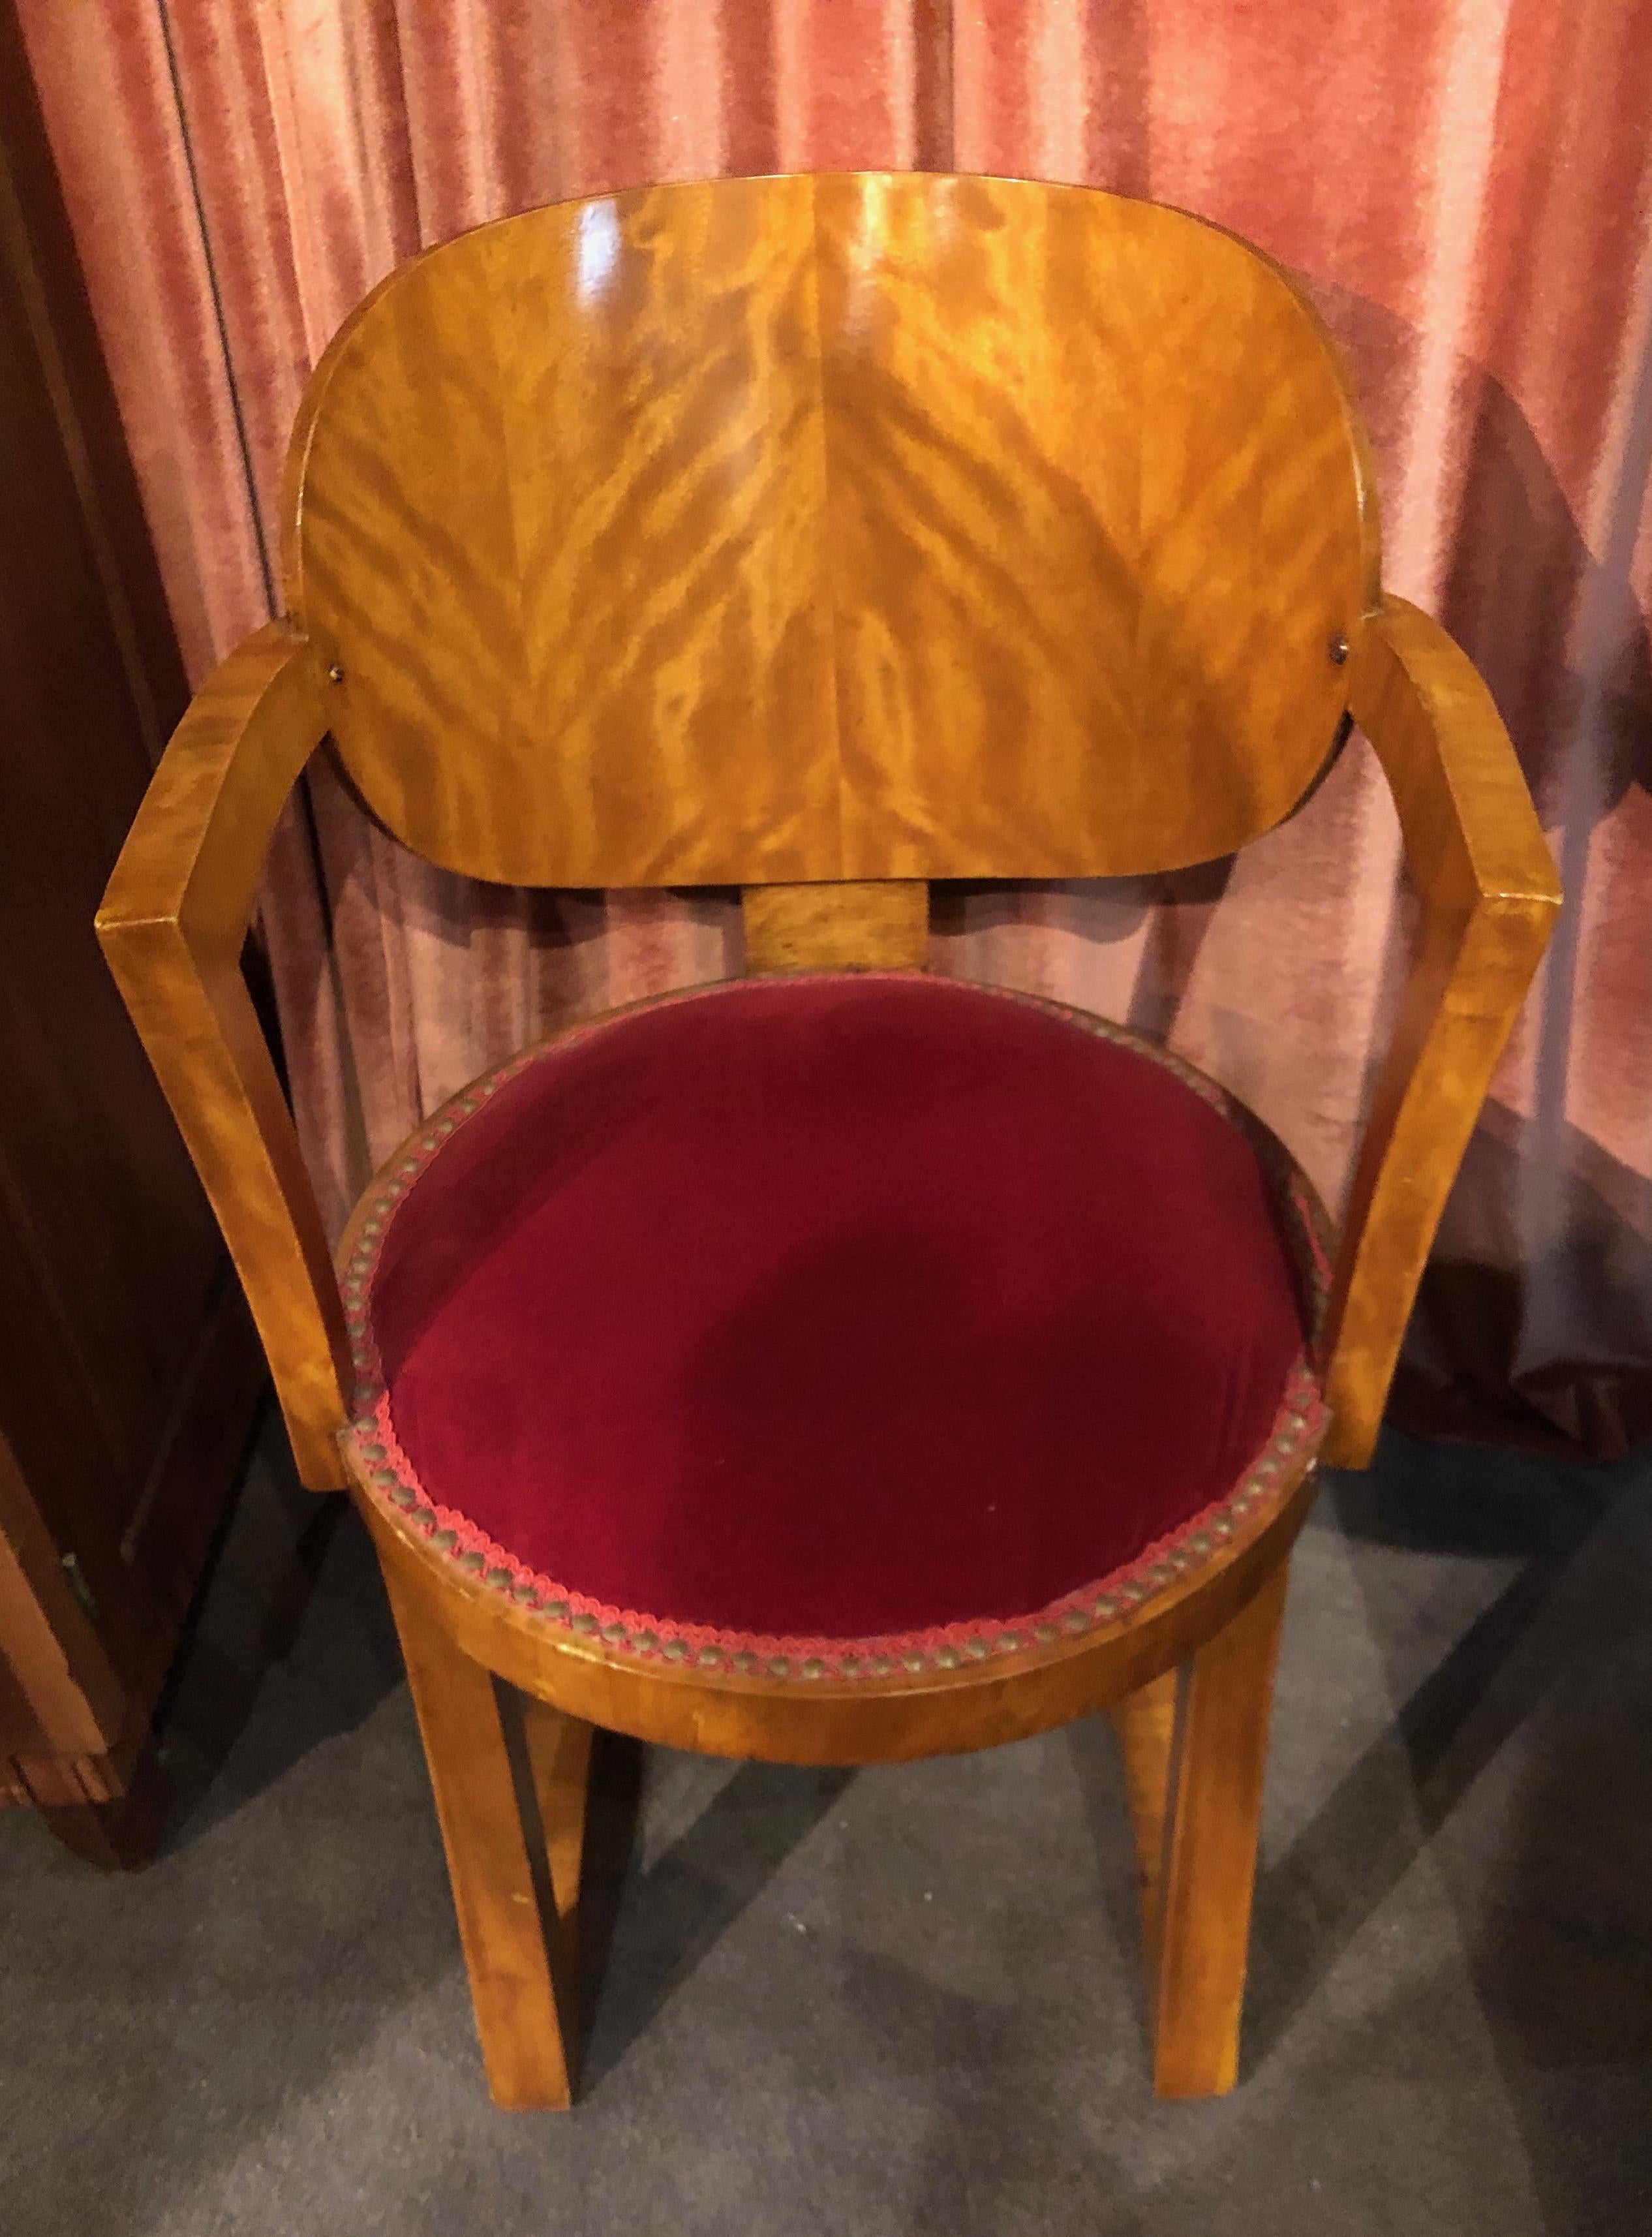 Flamed wood office or side chair. Art Deco style with beautiful lines, interesting exotic wood with unusual flared arms matching the legs. A simple upholstered stool seat in Burgundy velvet surrounded by French nails. Nice details of bentwood and